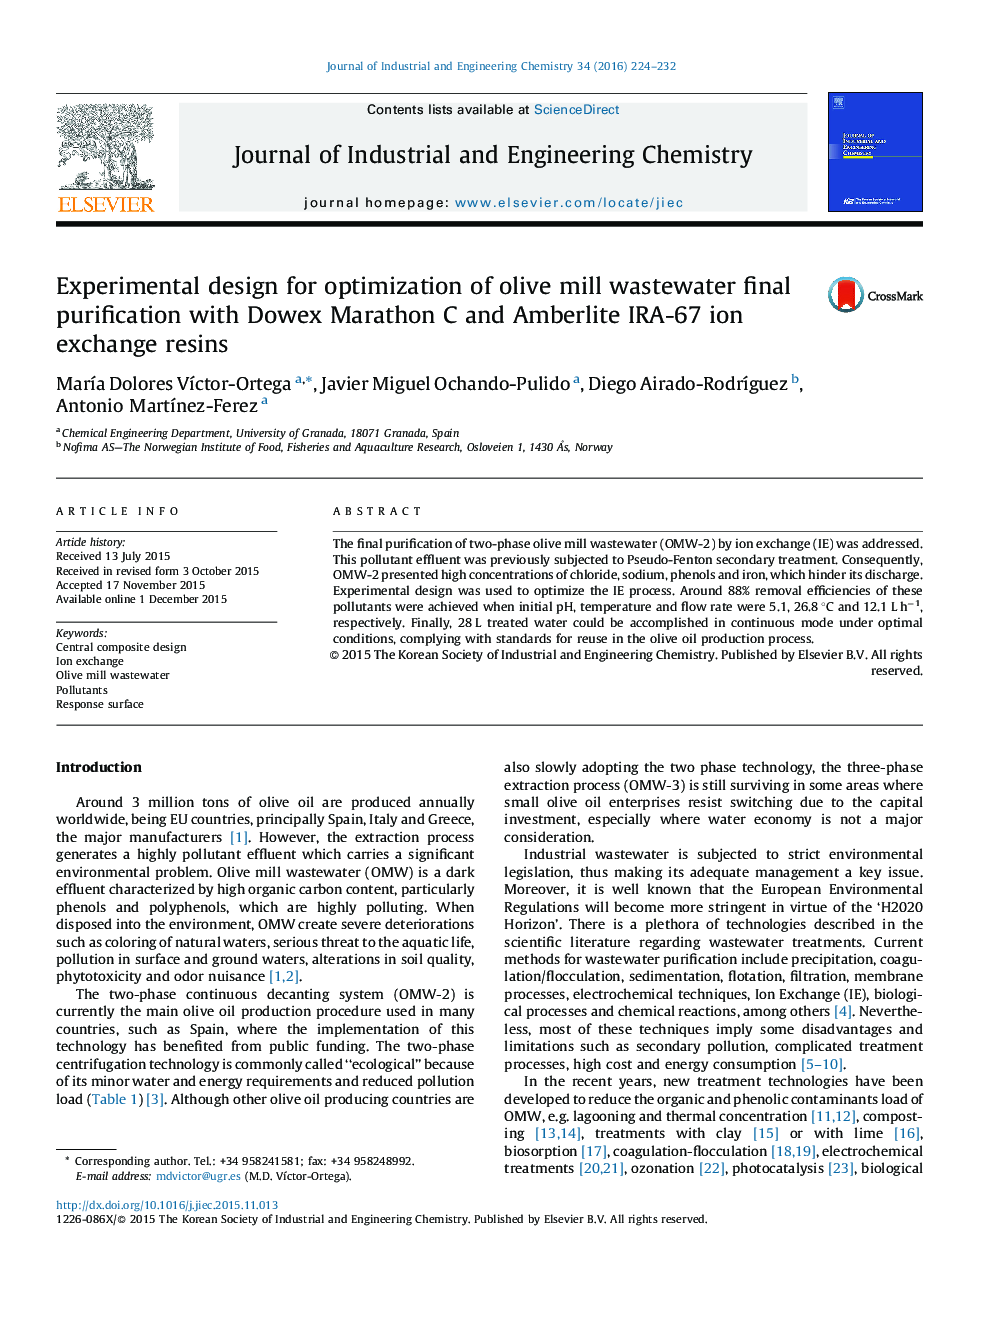 Experimental design for optimization of olive mill wastewater final purification with Dowex Marathon C and Amberlite IRA-67 ion exchange resins